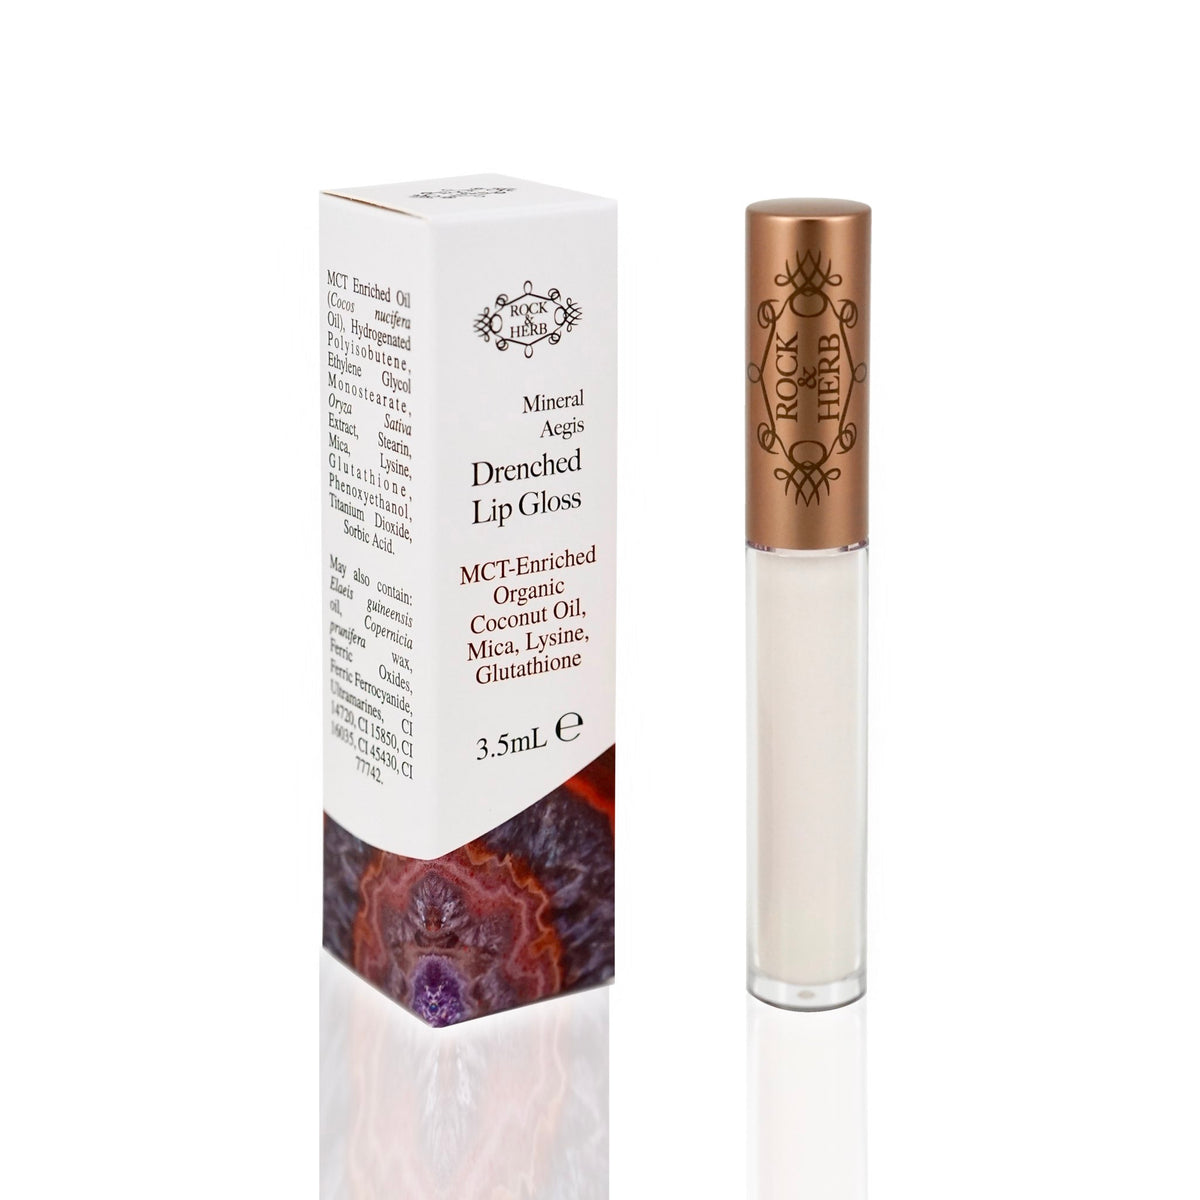 Mineral Aegis Drenched Lip Gloss